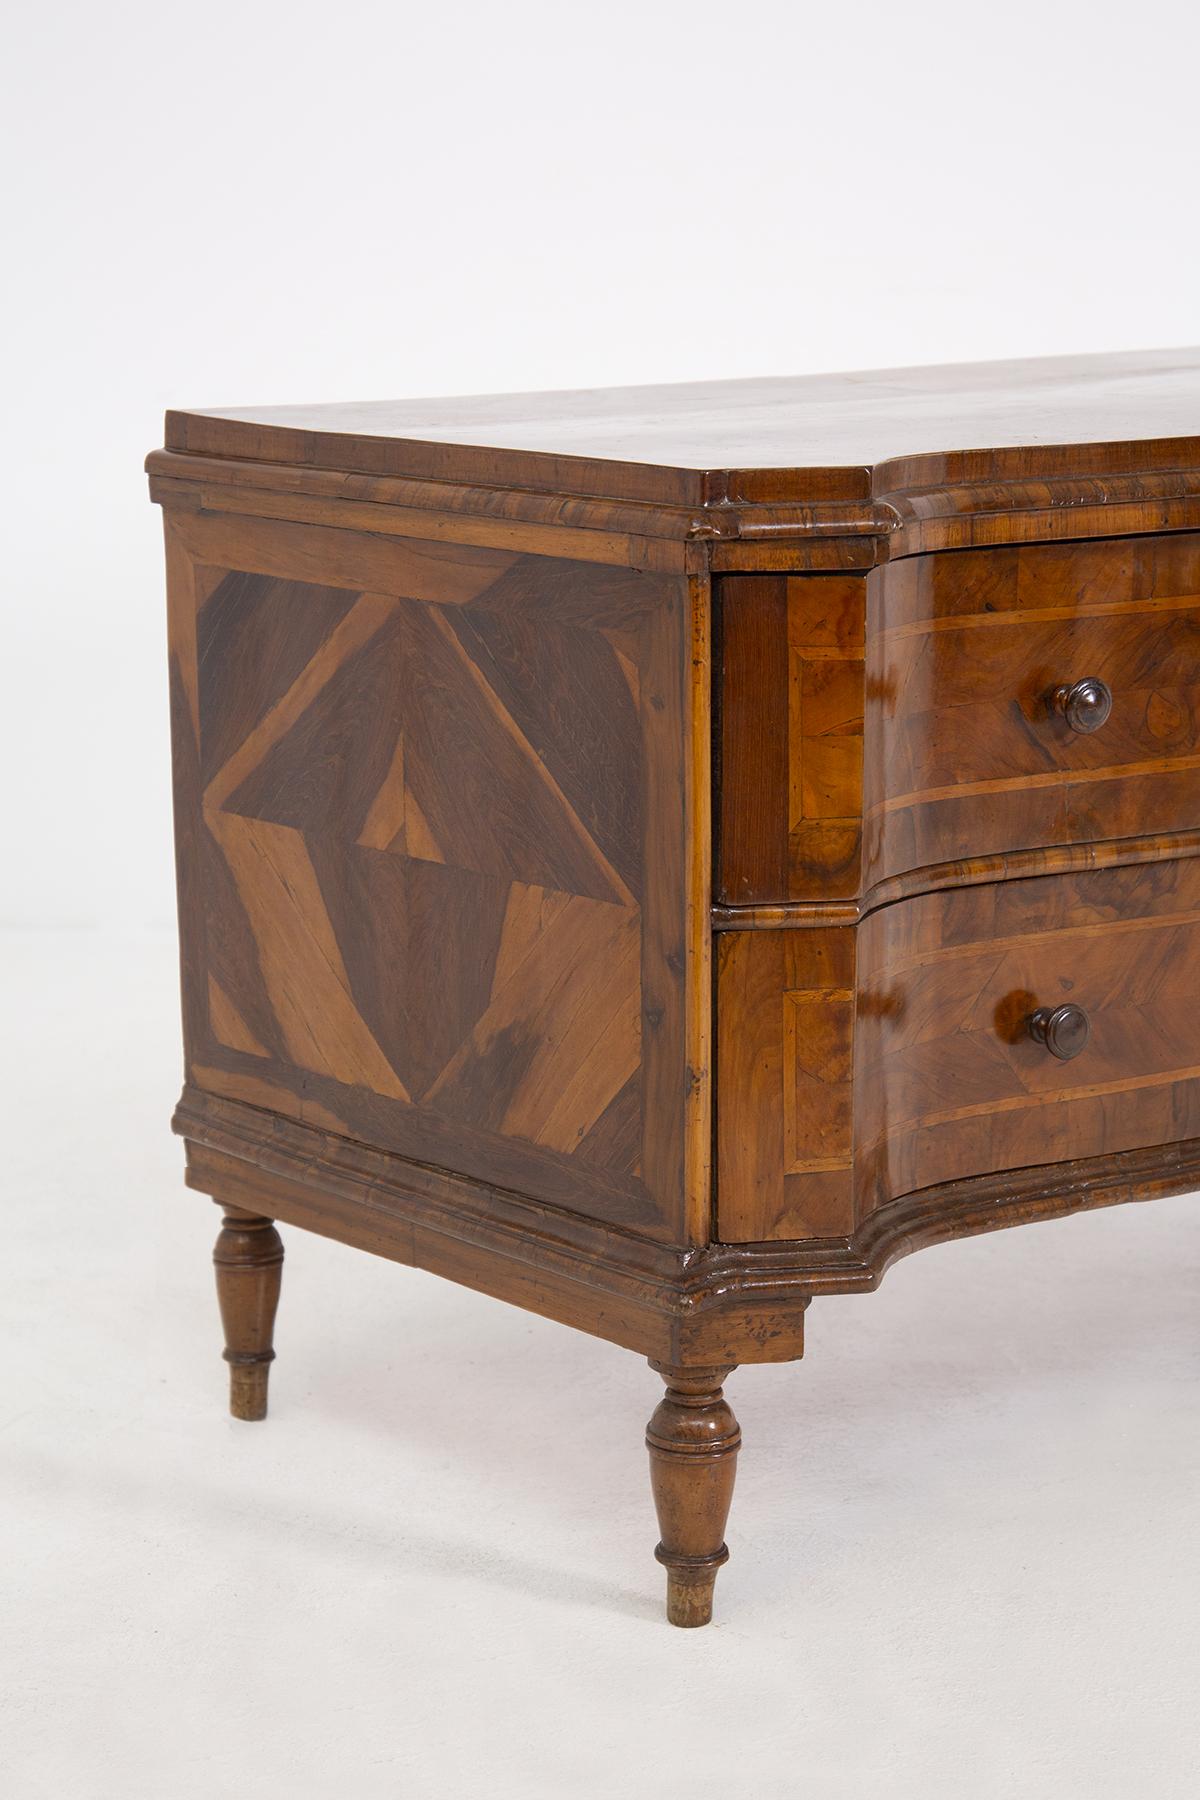 Refined and antique Italian chest of drawers of Venetian origin from around 1700. The chest of drawers is finely crafted by master carpenters in walnut burl, patina of time. We find a clever one of joints between the various types of walnut